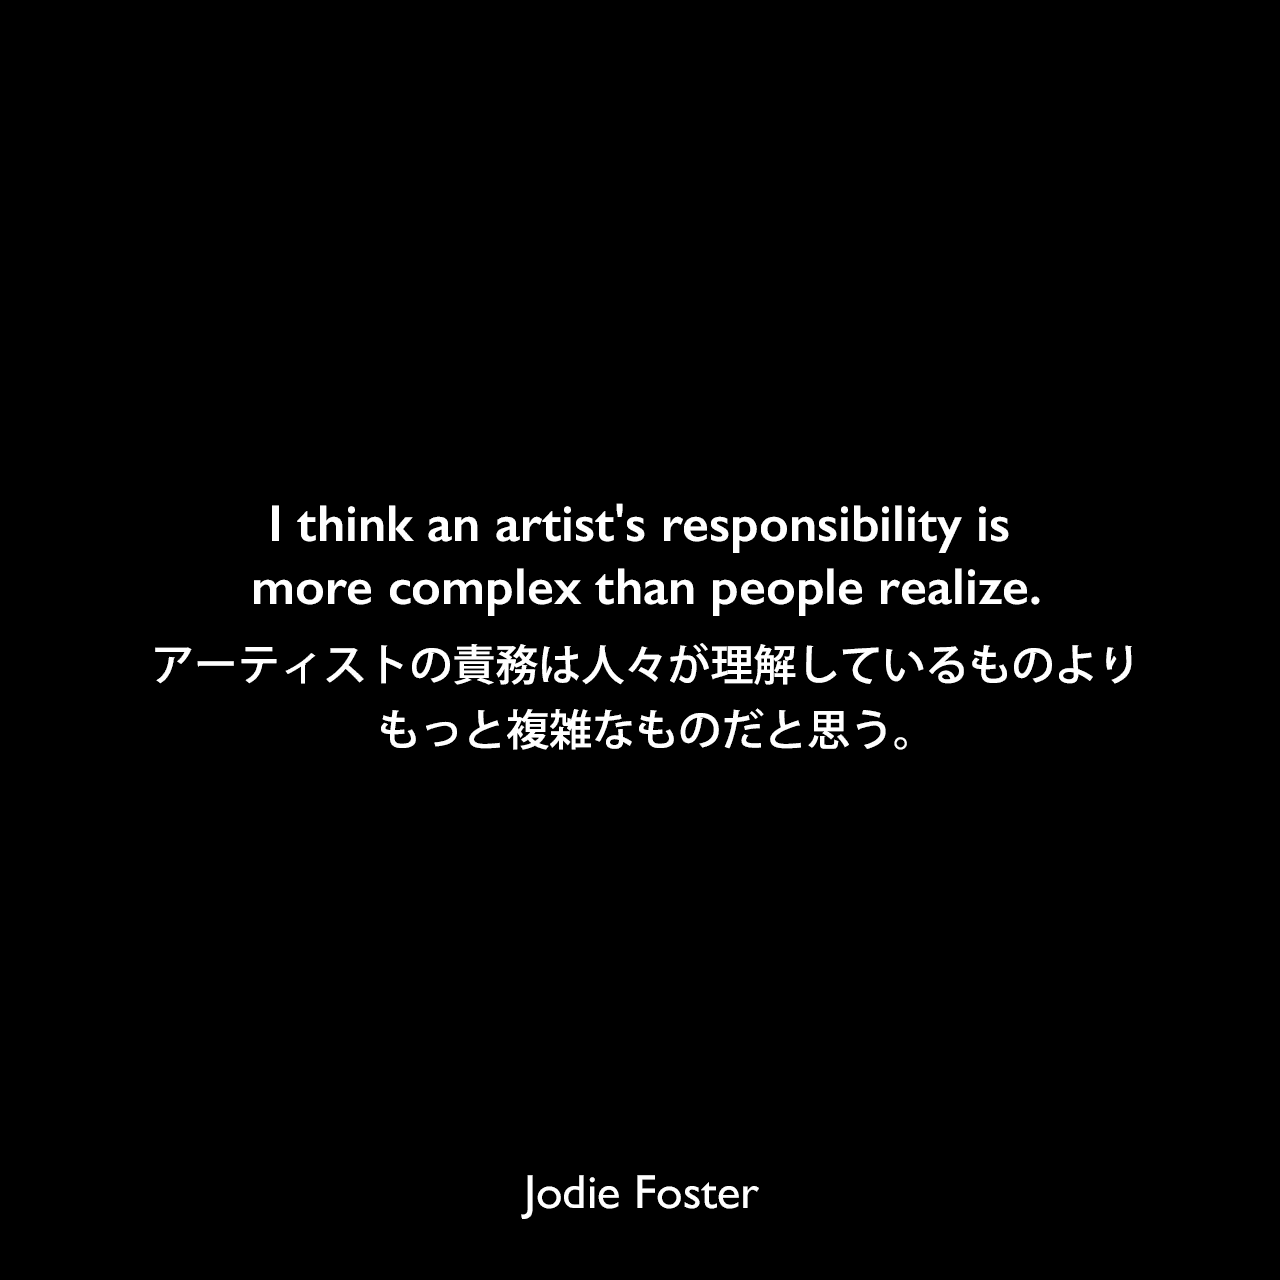 I think an artist's responsibility is more complex than people realize.アーティストの責務は人々が理解しているものよりもっと複雑なものだと思う。Jodie Foster